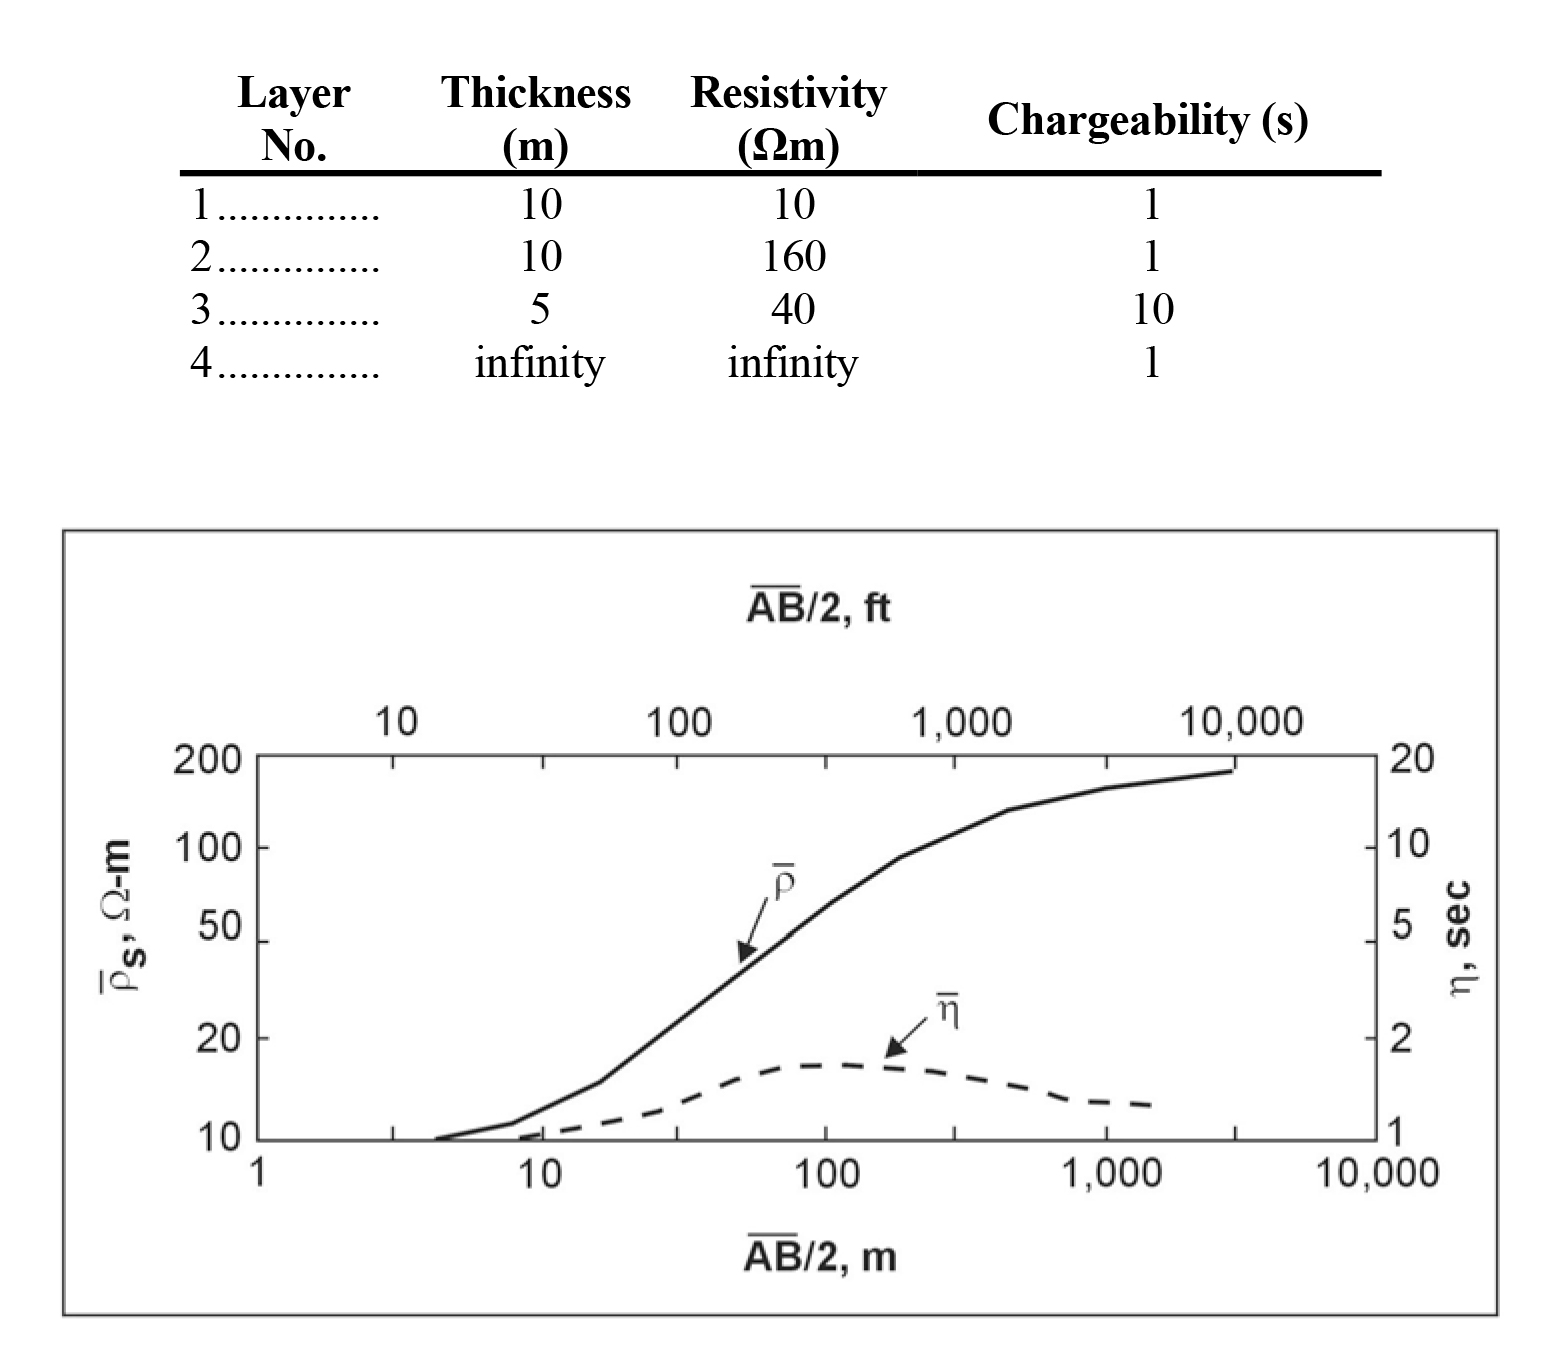 Apparent resistivity and apparent chargeability (IP) sounding curves for a four-layer model. (Zohdy 1974a, 1974b)